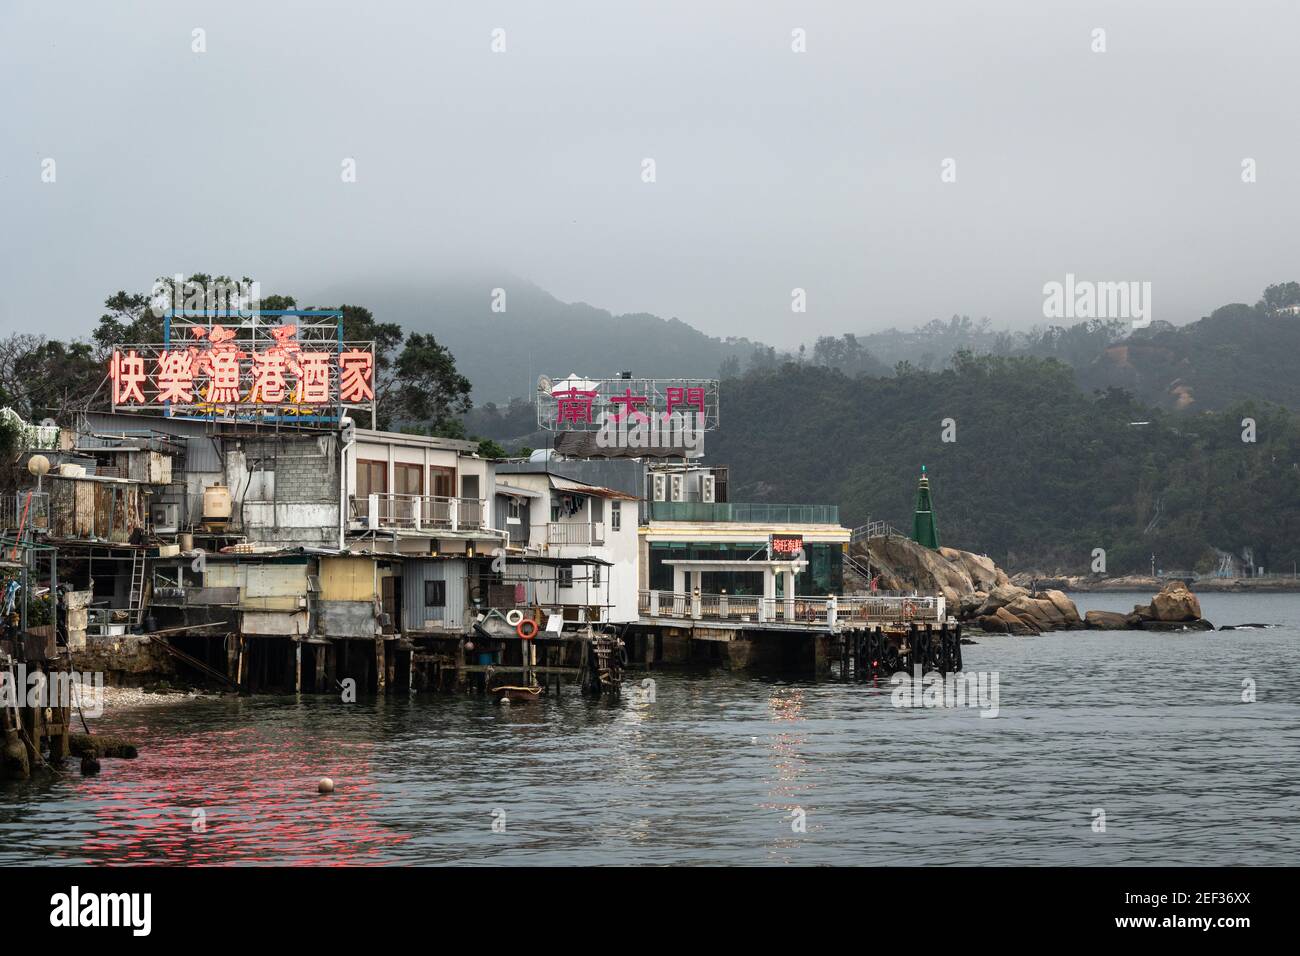 Lei Yue Mun, Hong Kong - March 15 2019: The seafood restaurants signs of the popular fishing village illuminate the water in Kowloon with the lighthou Stock Photo